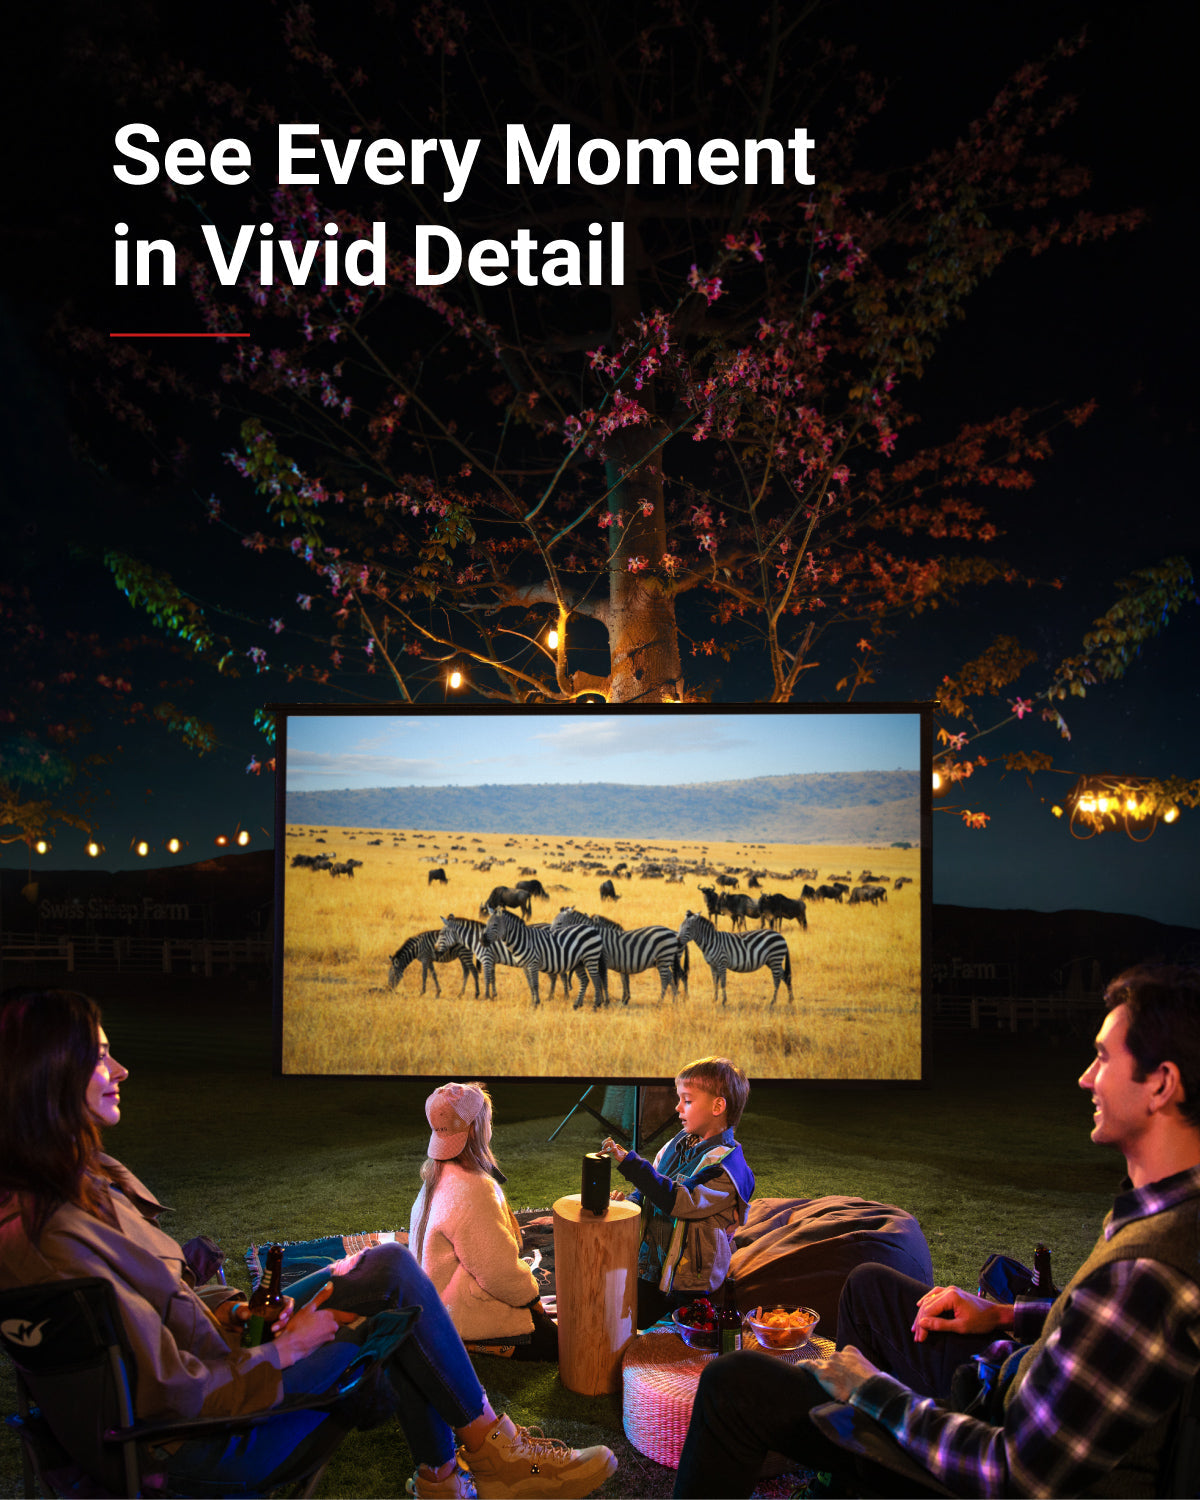 At night, a family uses a Capsule portable projector to watch a movie about zebras outside with a screen set up near a tree.